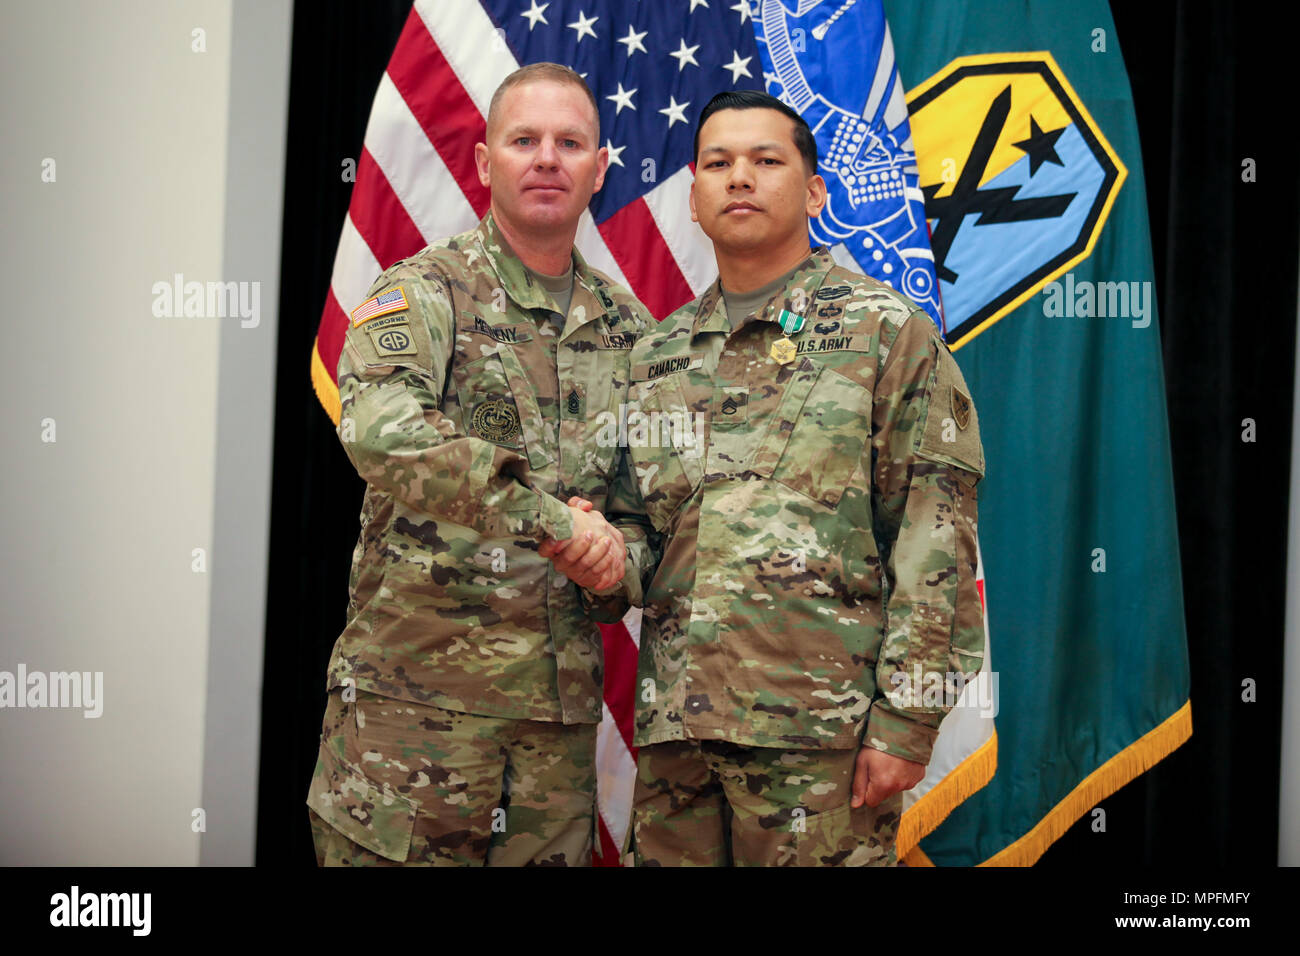 (FORT BENNING, Ga) Command Sgt. Maj. Timothy Metheny, Maneuver Center of Excellence command sergeant major, presents Staff Sgt. Michael J. Camacho of Charlie Company, 1st Battalion, 81st Armor Regiment with the Army Commendation Medal for winning the Platoon Sergeant of the Year category in the 2017 Fort Benning Best Warrior Competition, March 8, 2017, here, in Derby Auditorium at McGinnis-Wickam Hall. Camacho will compete in the Training and Doctrine Command Best Warrior Competition later this year. (Photos by: Markeith Horace/MCoE PAO Photographer) Stock Photo